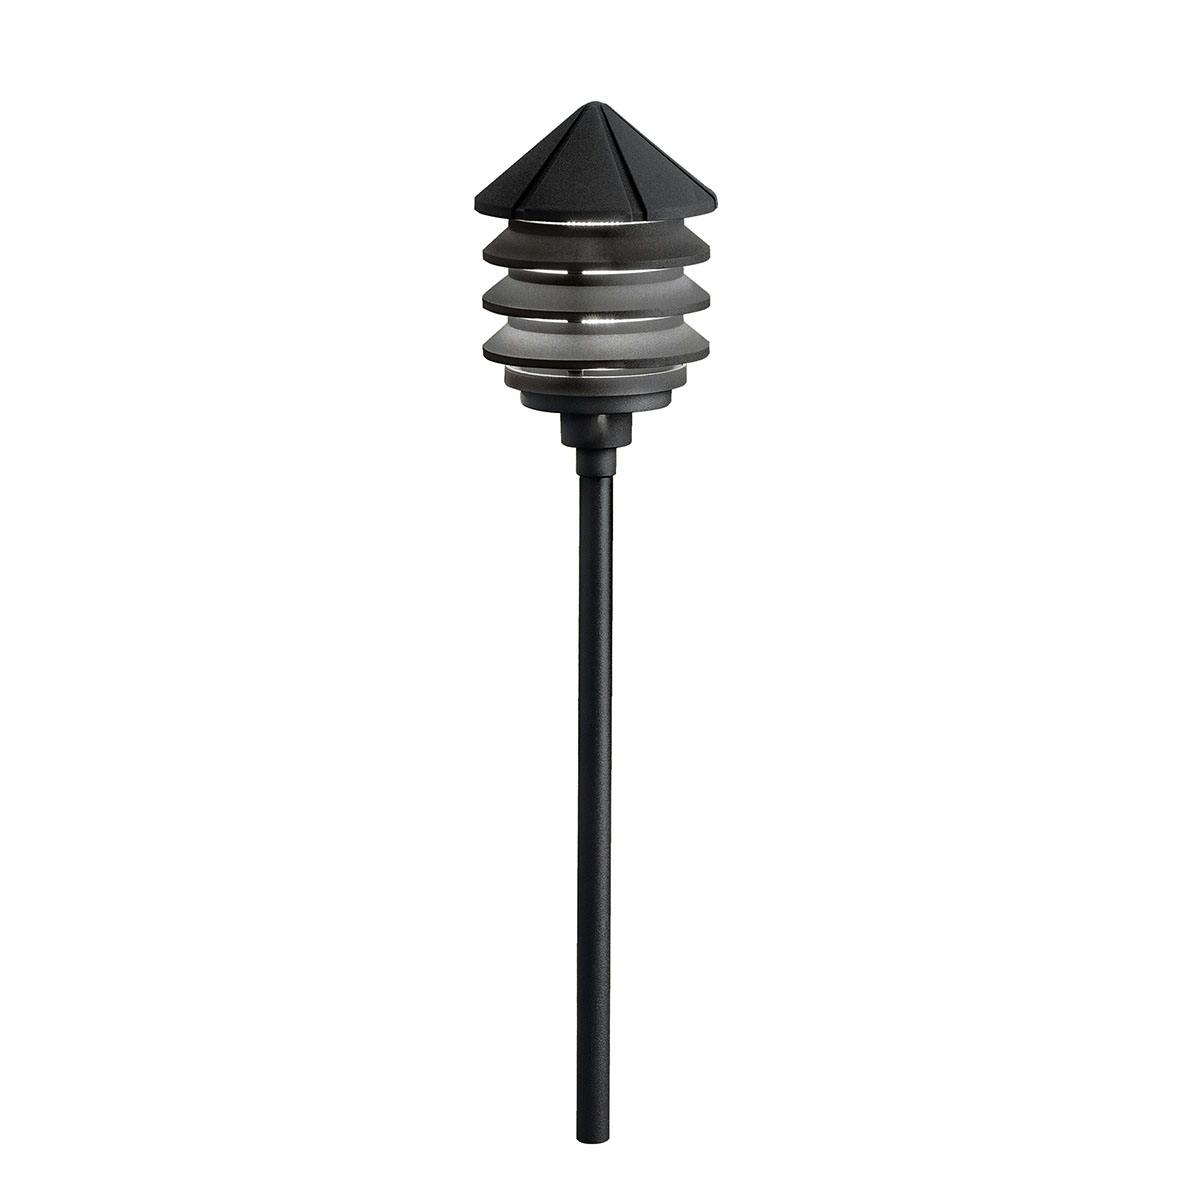 Three Tier 12V Path Light Textured Black on a white background